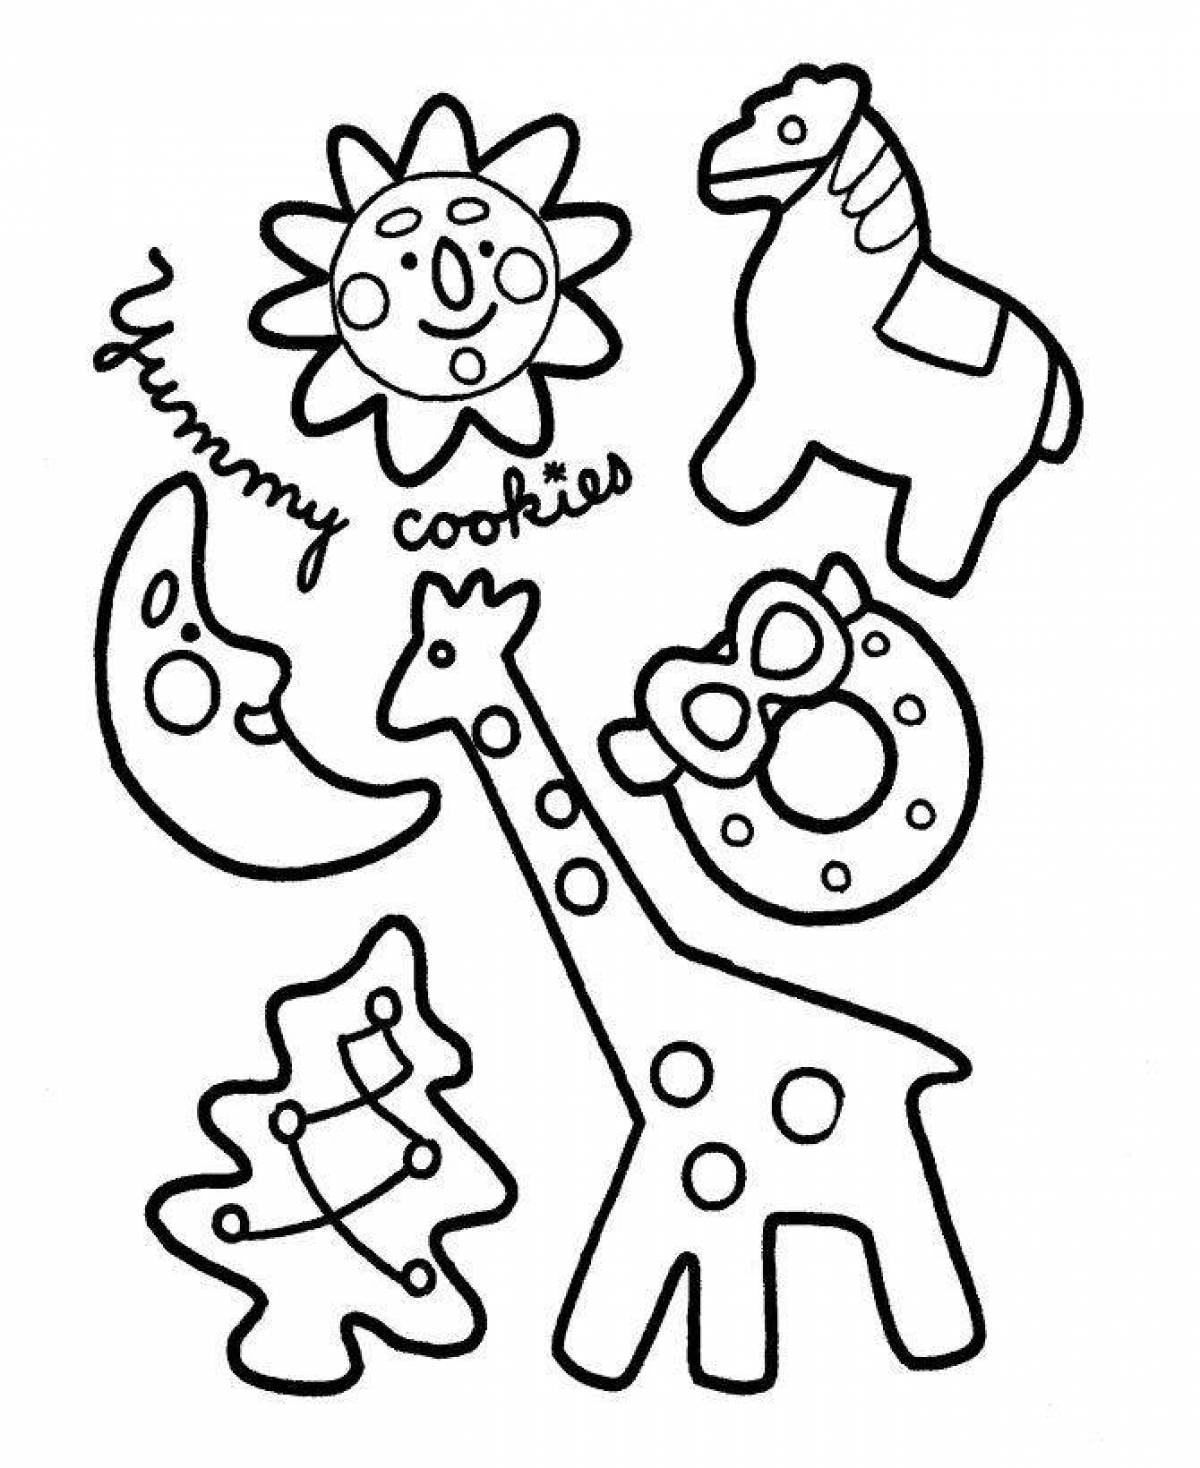 Delicious gingerbread coloring page